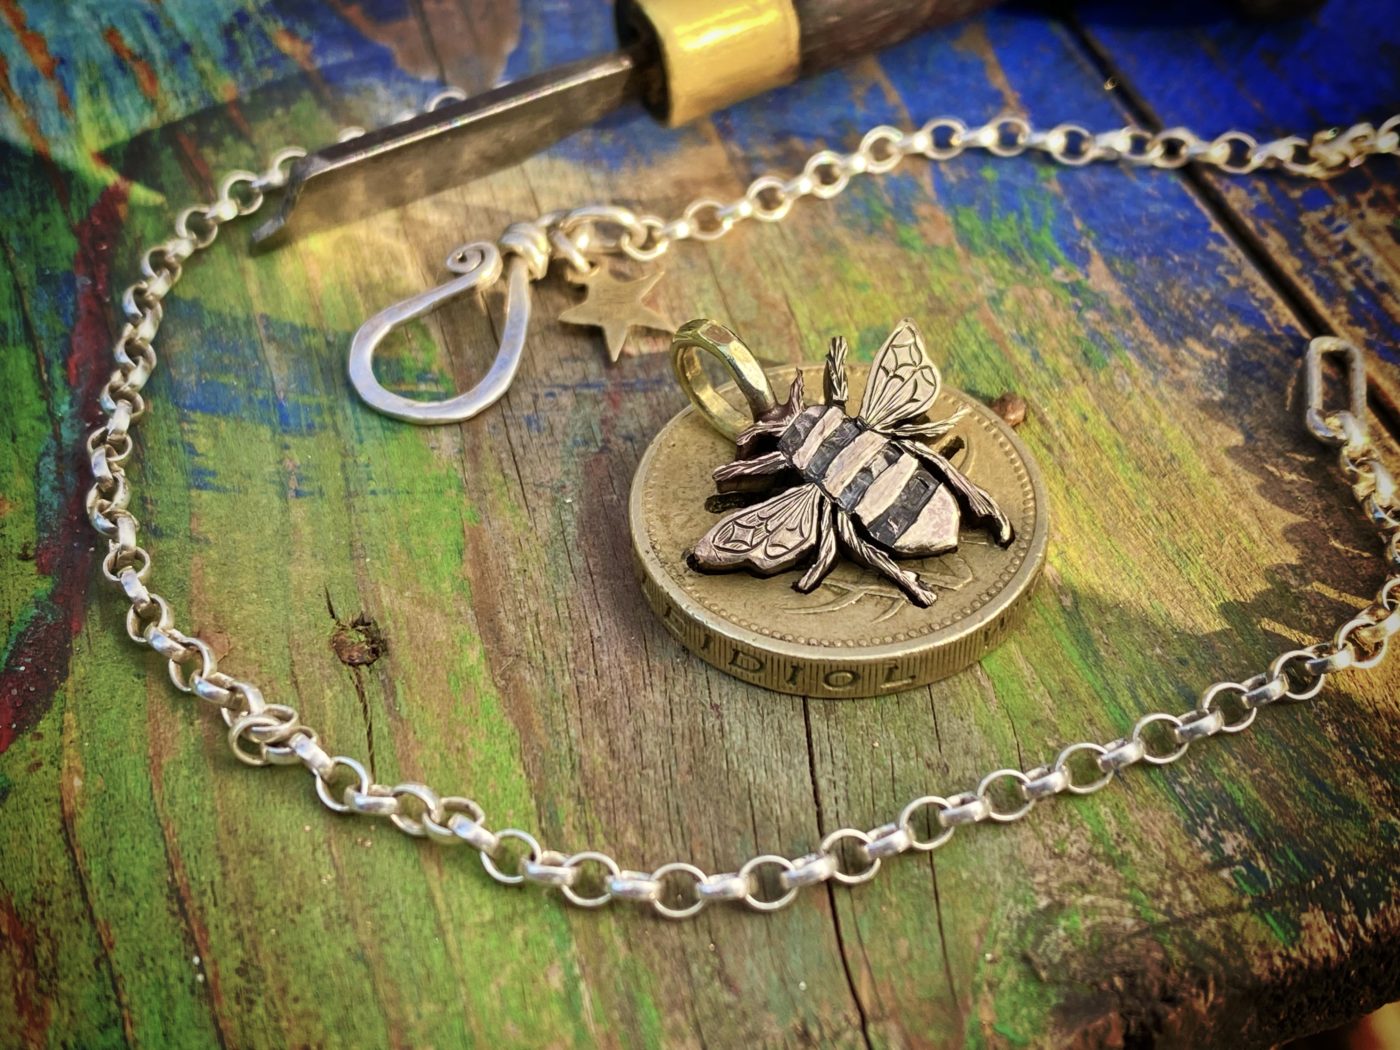 Bee jewellery handmade, handcrafted and completely recycled from old out of circulation coins. Each piece is ethically made in Cambridge England